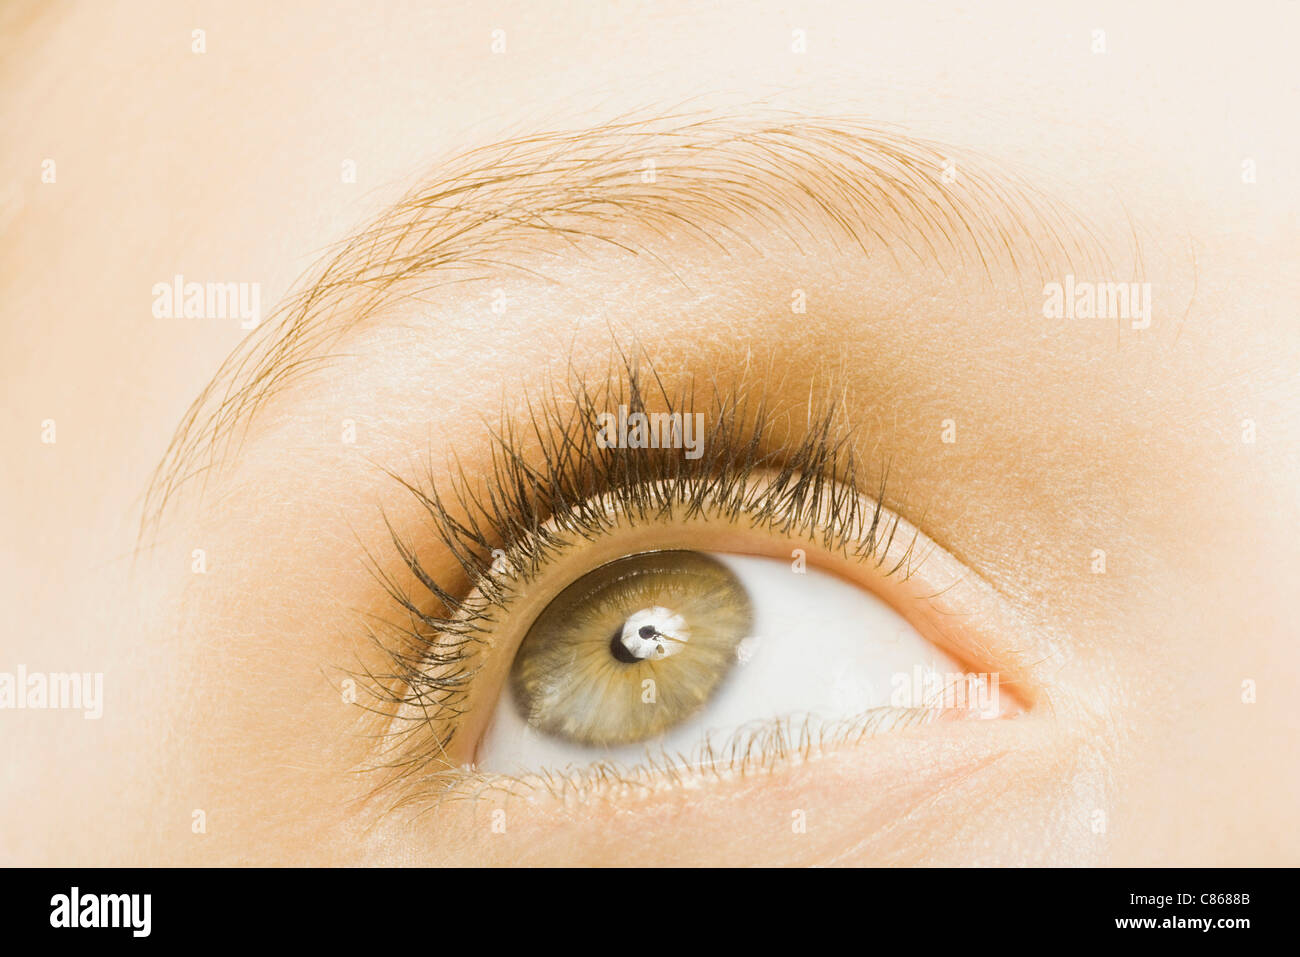 Woman's eye, looking up Stock Photo